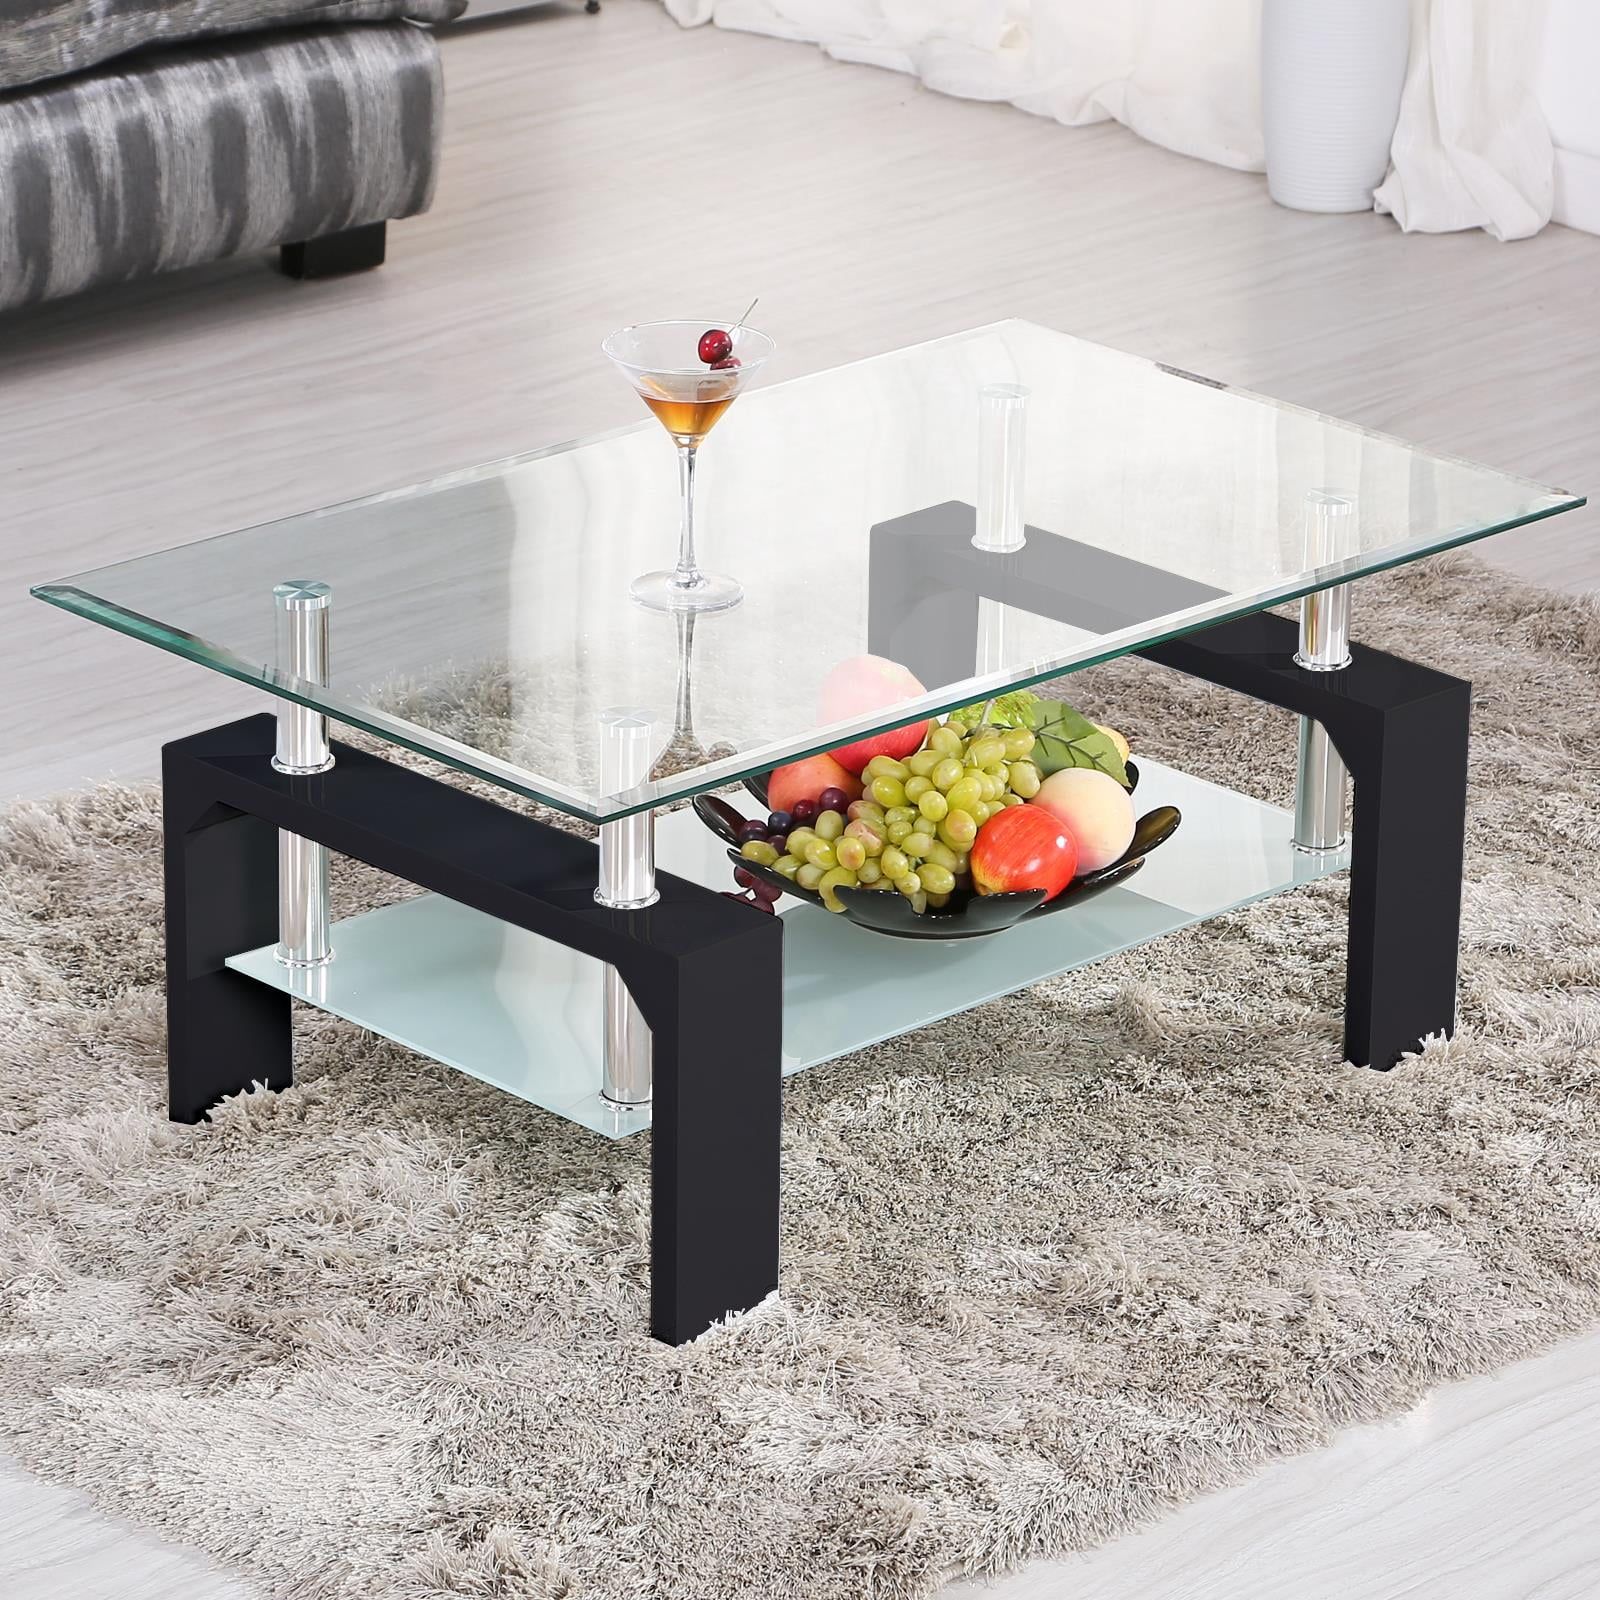 Ktaxon Rectangular Glass Coffee Table Shelf Wood Living Room Furniture Inside Glass Coffee Tables With Lower Shelves (View 7 of 20)